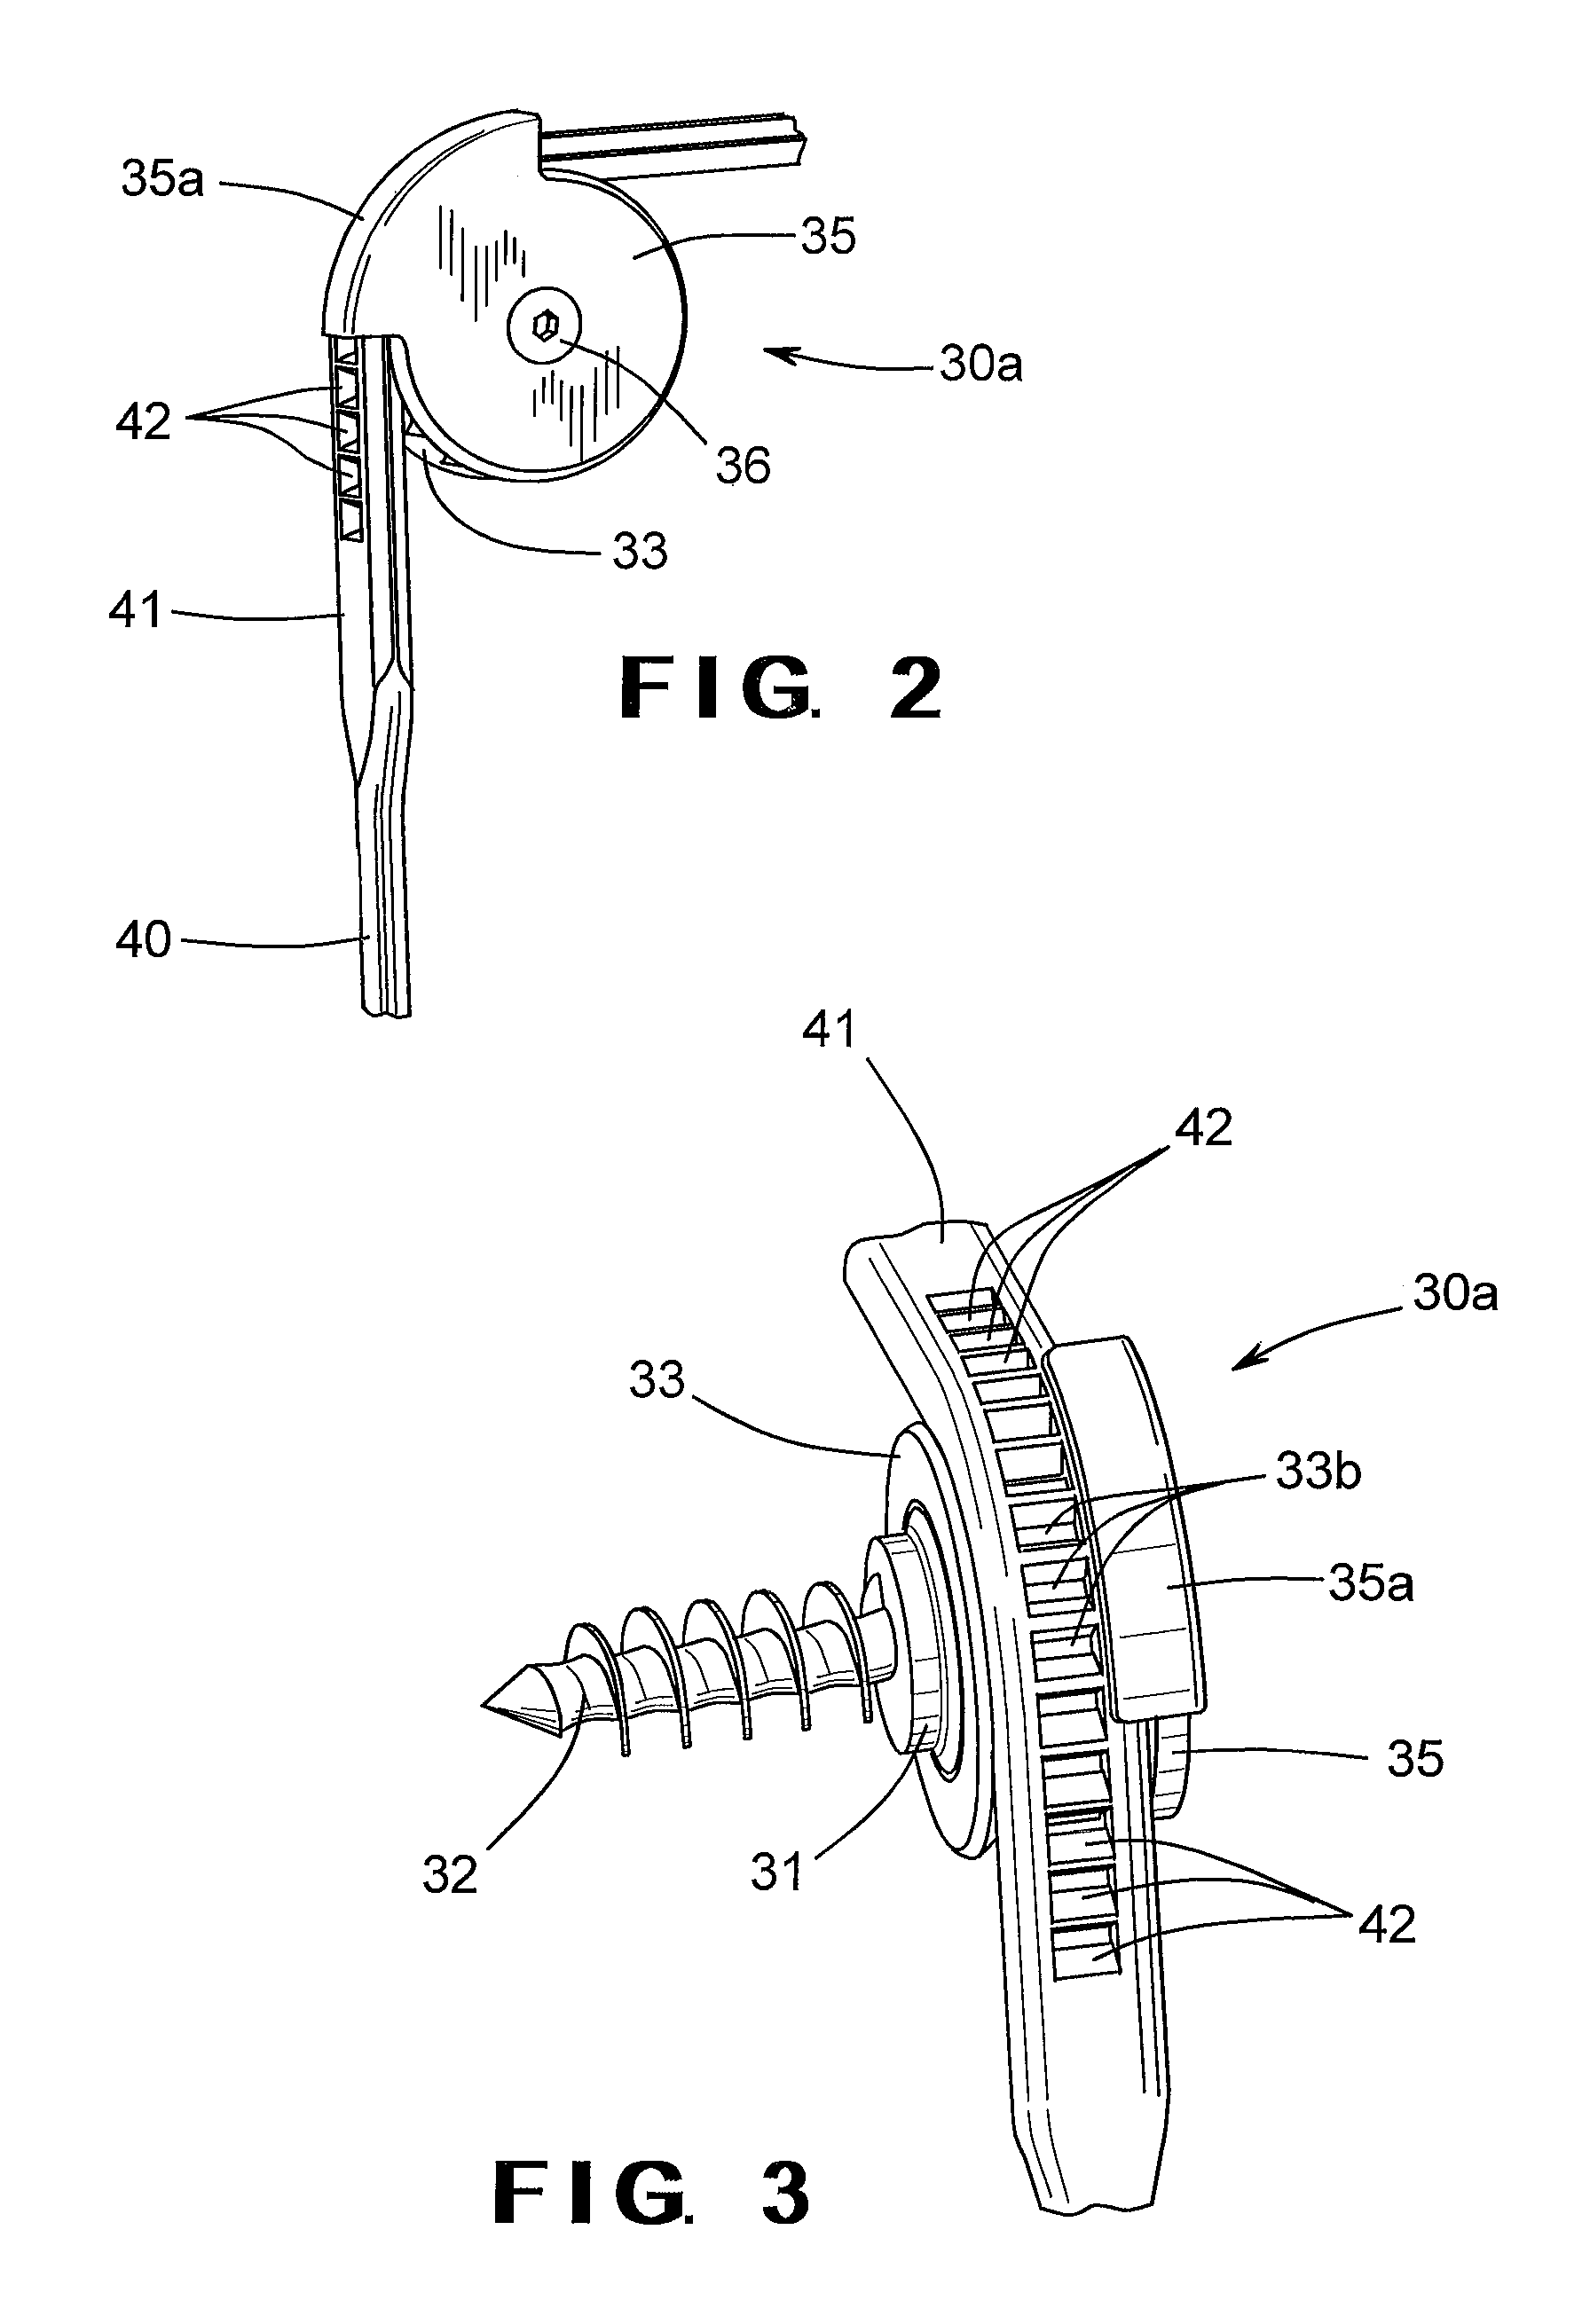 Unidirectional rotatory pedicle screw and spinal deformity correction device for correction of spinal deformity in growing children